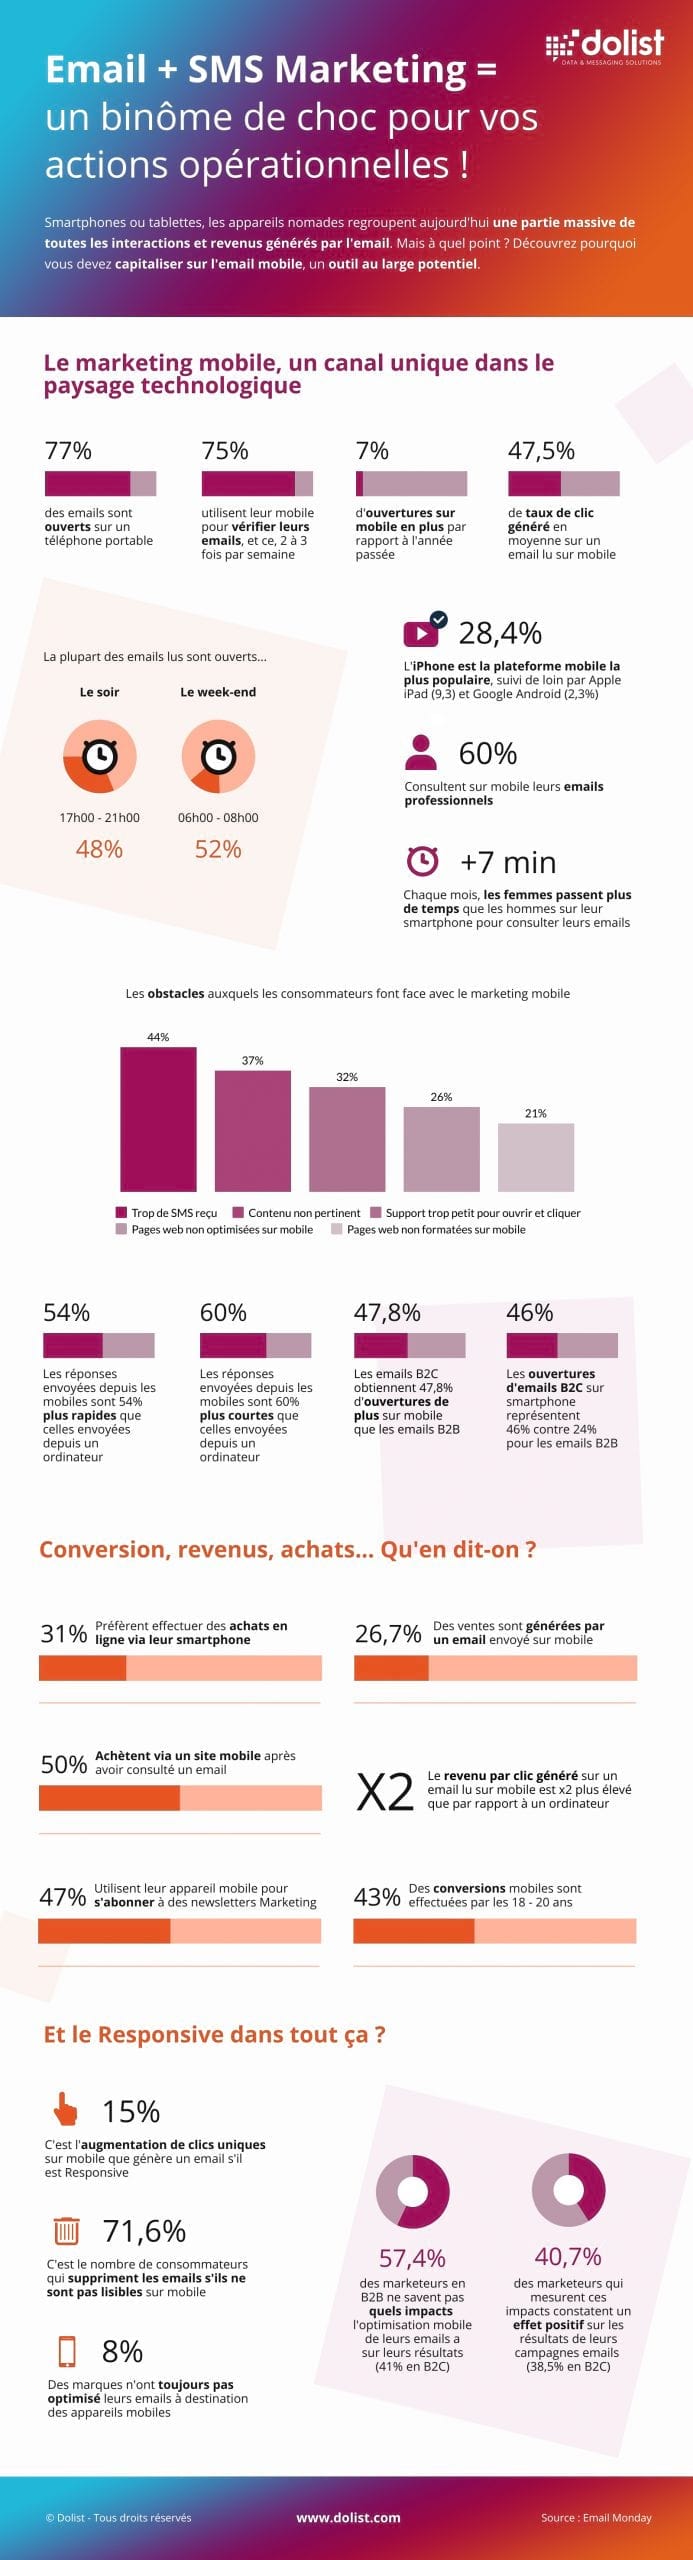 Infographie Email & SMS Marketing